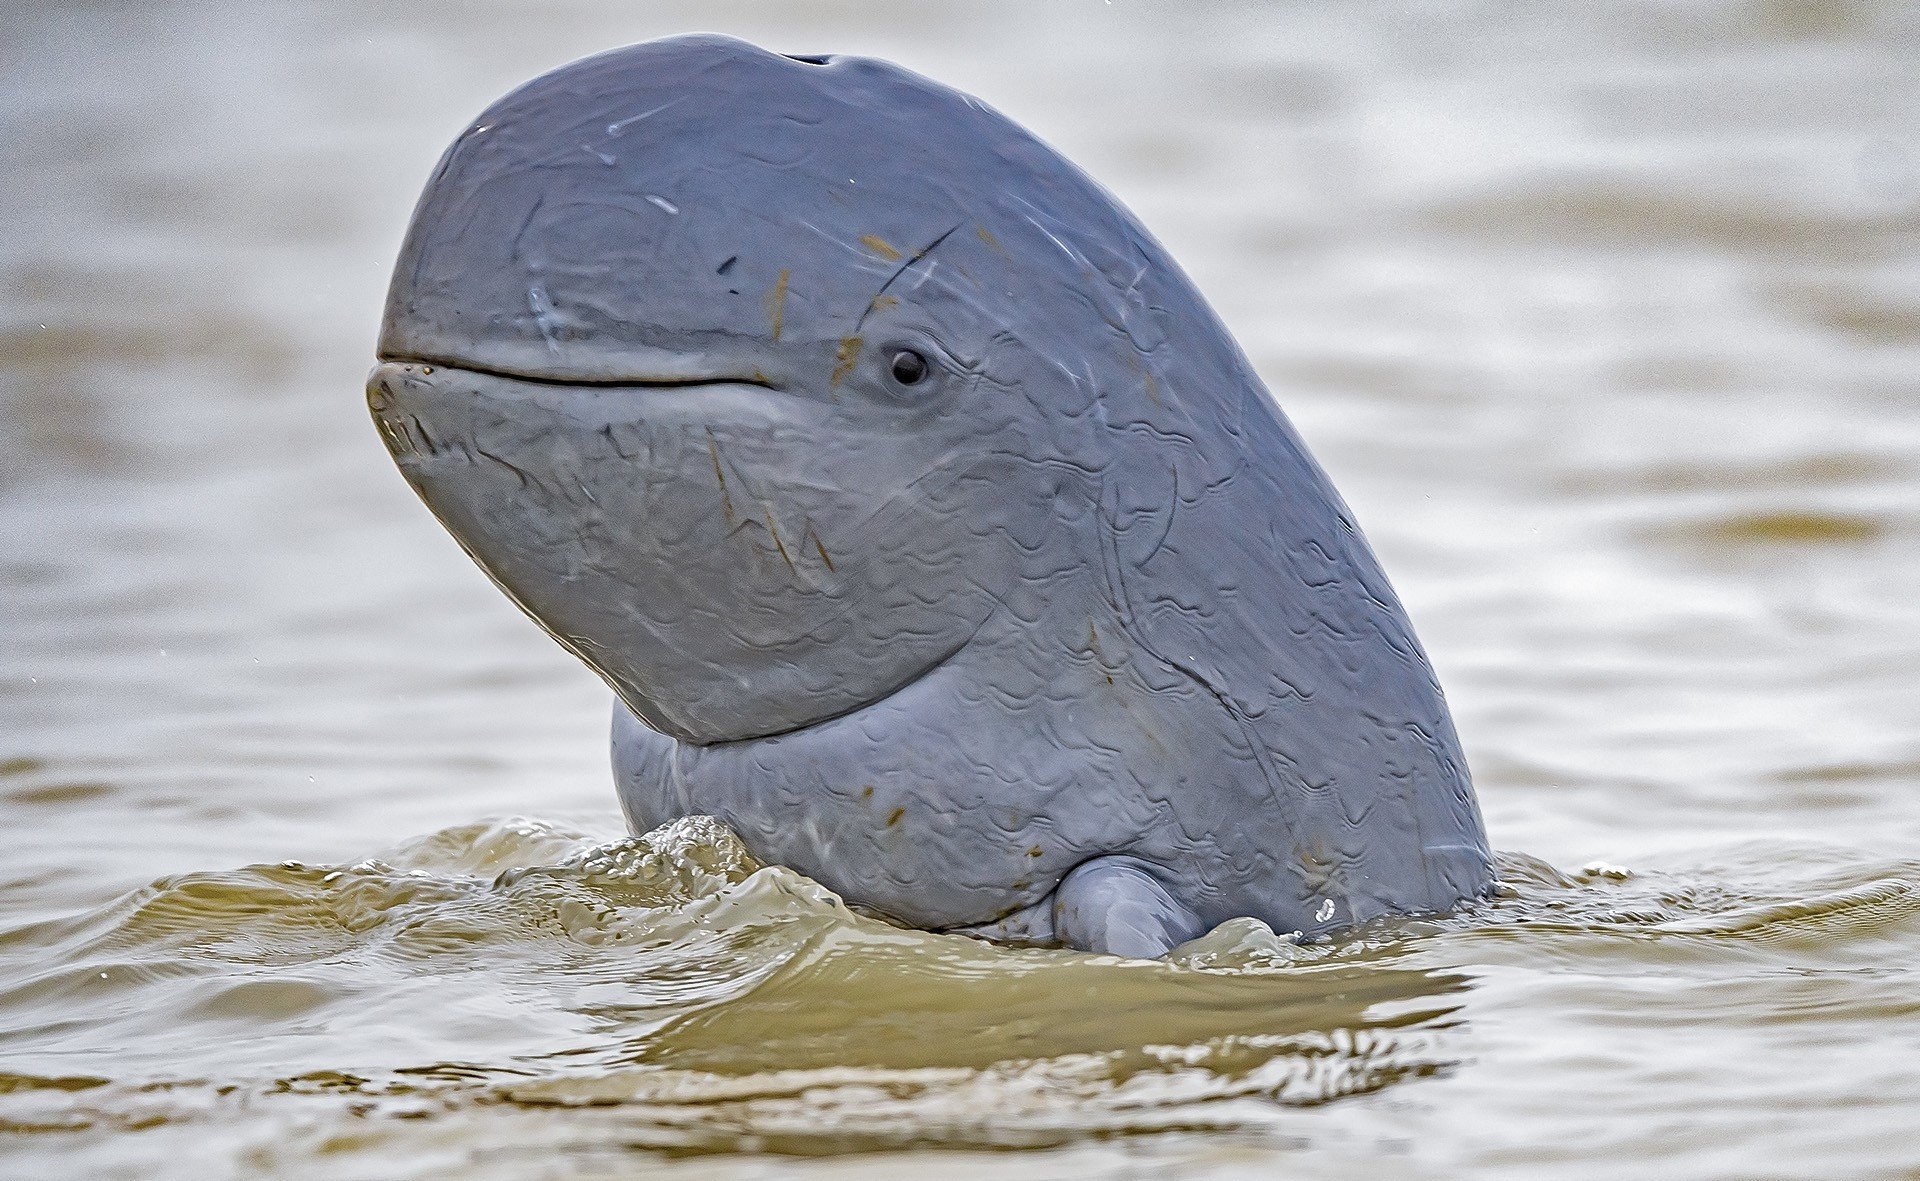 The latest Irrawaddy dolphin death is believed to have stemmed from entanglement in an illegal fishing line. Photo: Anupam Koley/Nature in Focus Photography Awards